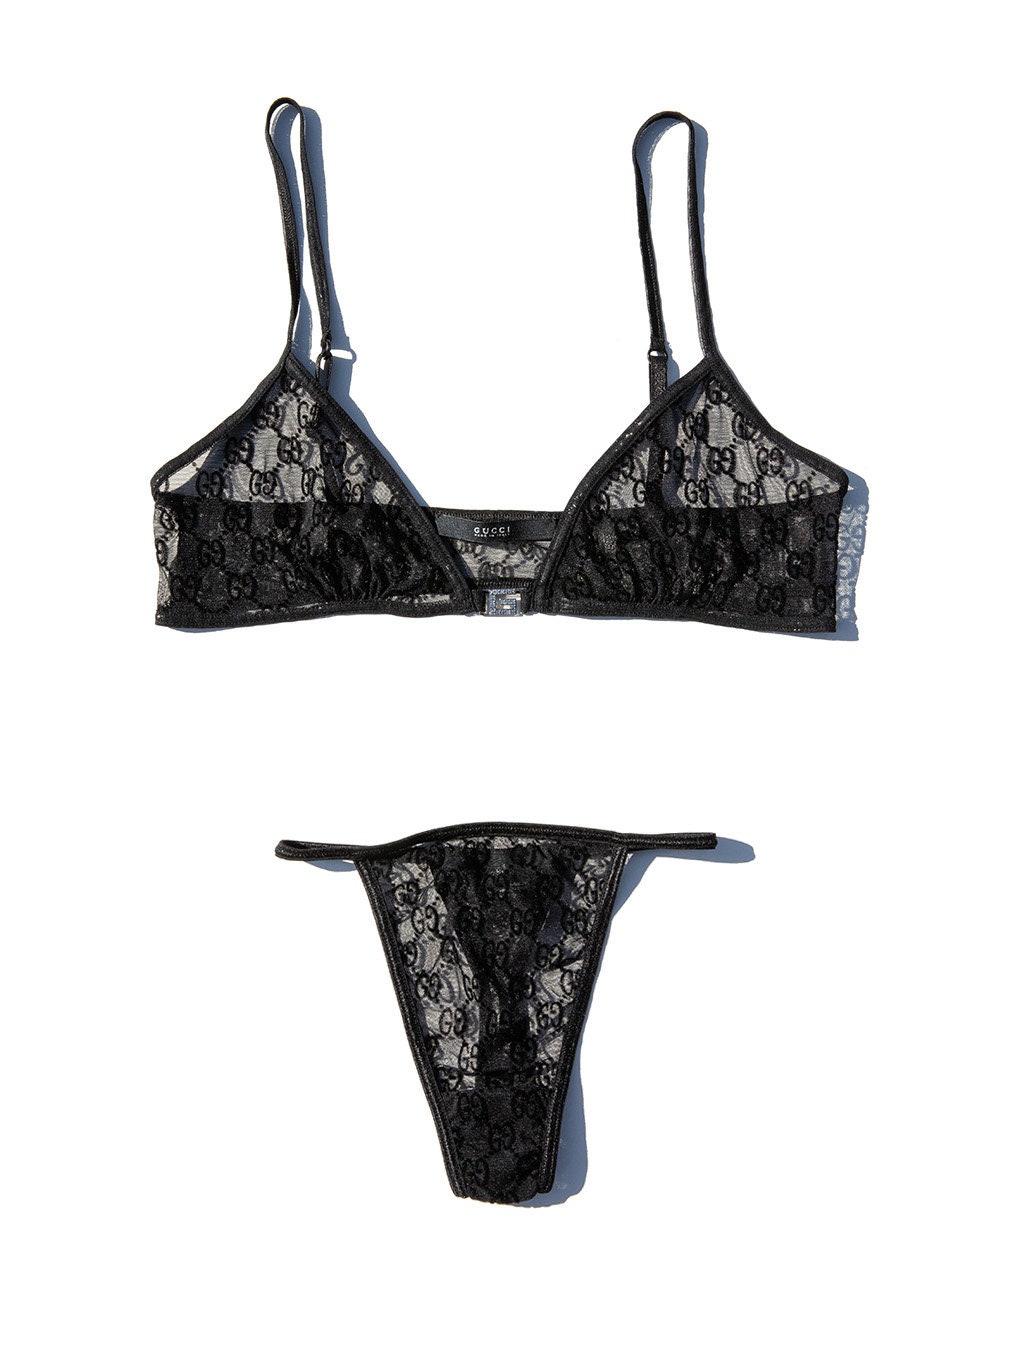 Extremely Rare Vintage SS 1998 Tom Ford Gucci Mesh and Velvet Monogram  Lingerie Set Featuring G Encrusted With Swarovski Crystals Sz S/XS 